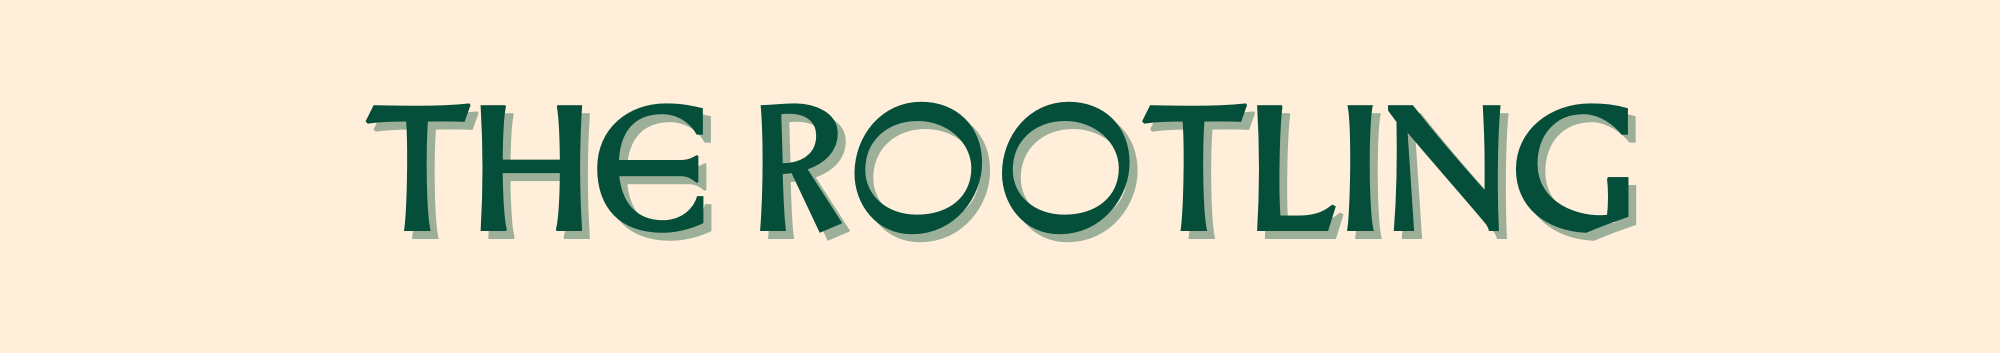 The Rootling